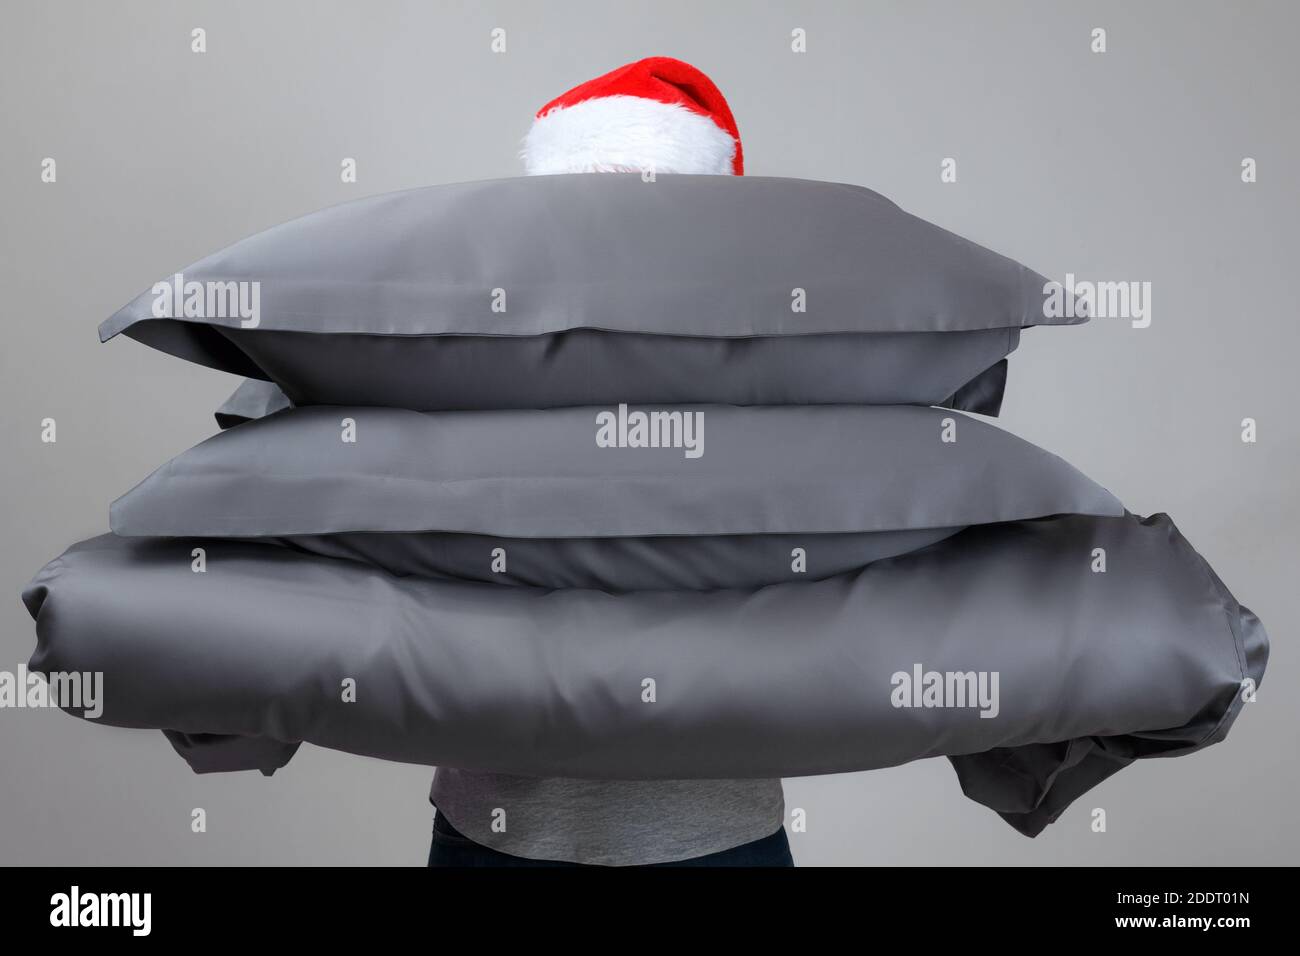 Woman in Santa Claus hat holding a warm duvet and feather pillows of gray. Bedding for sleeping. Stock Photo